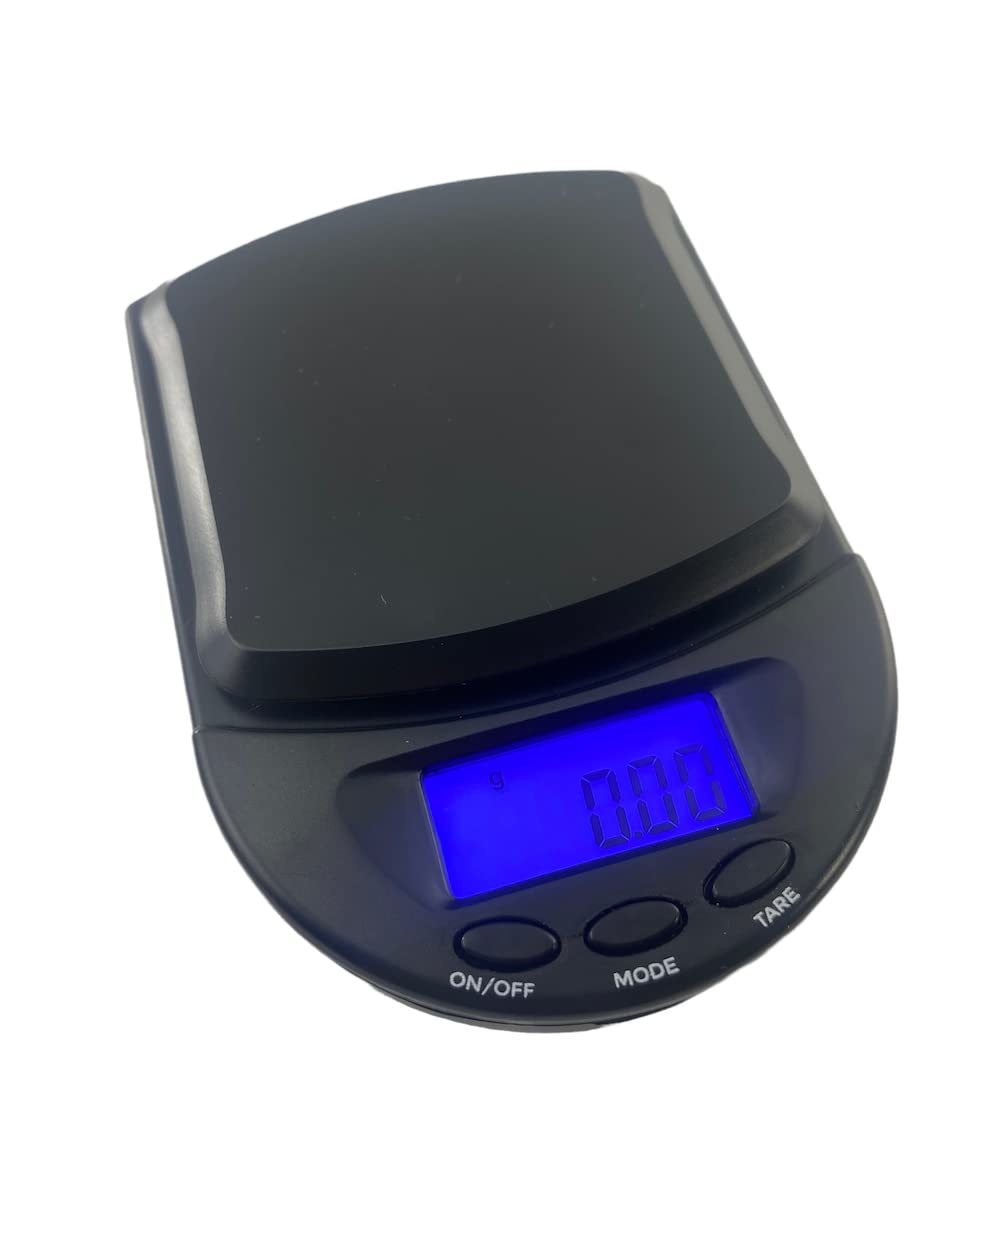 Goodful Digital Scale, Measures G, OZ, LB, and KG, Auto Off and